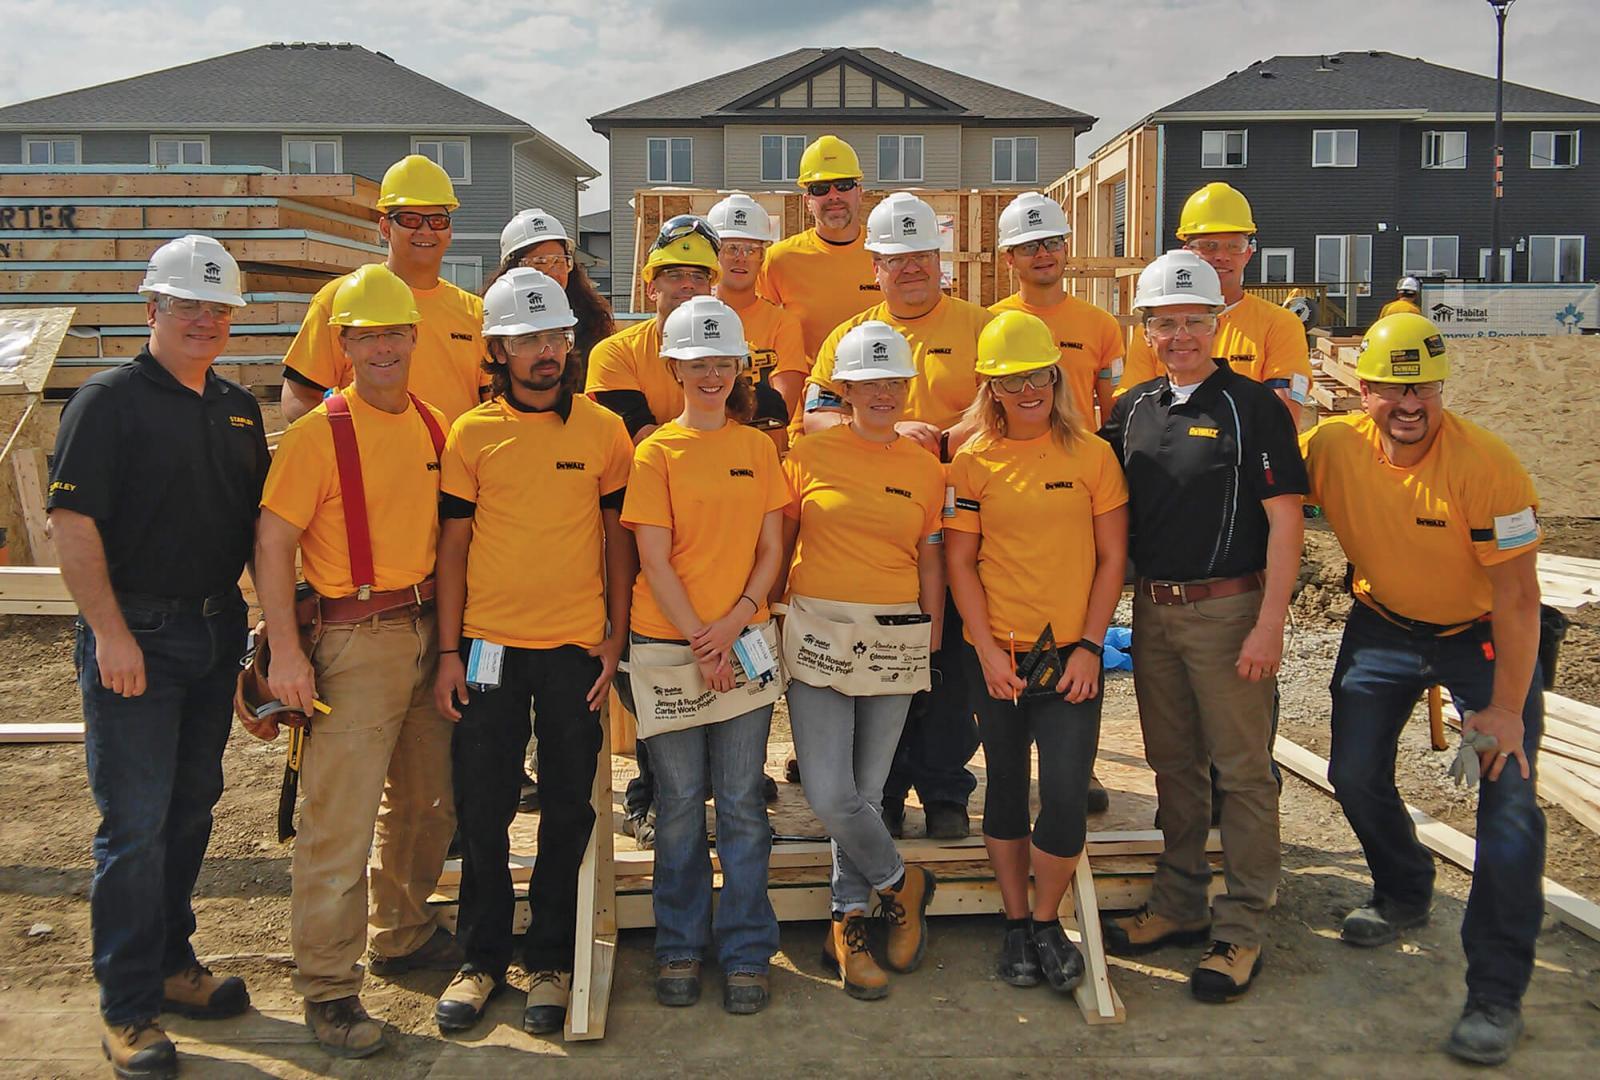 Stanley Black and Decker supports Habitat for Humanity